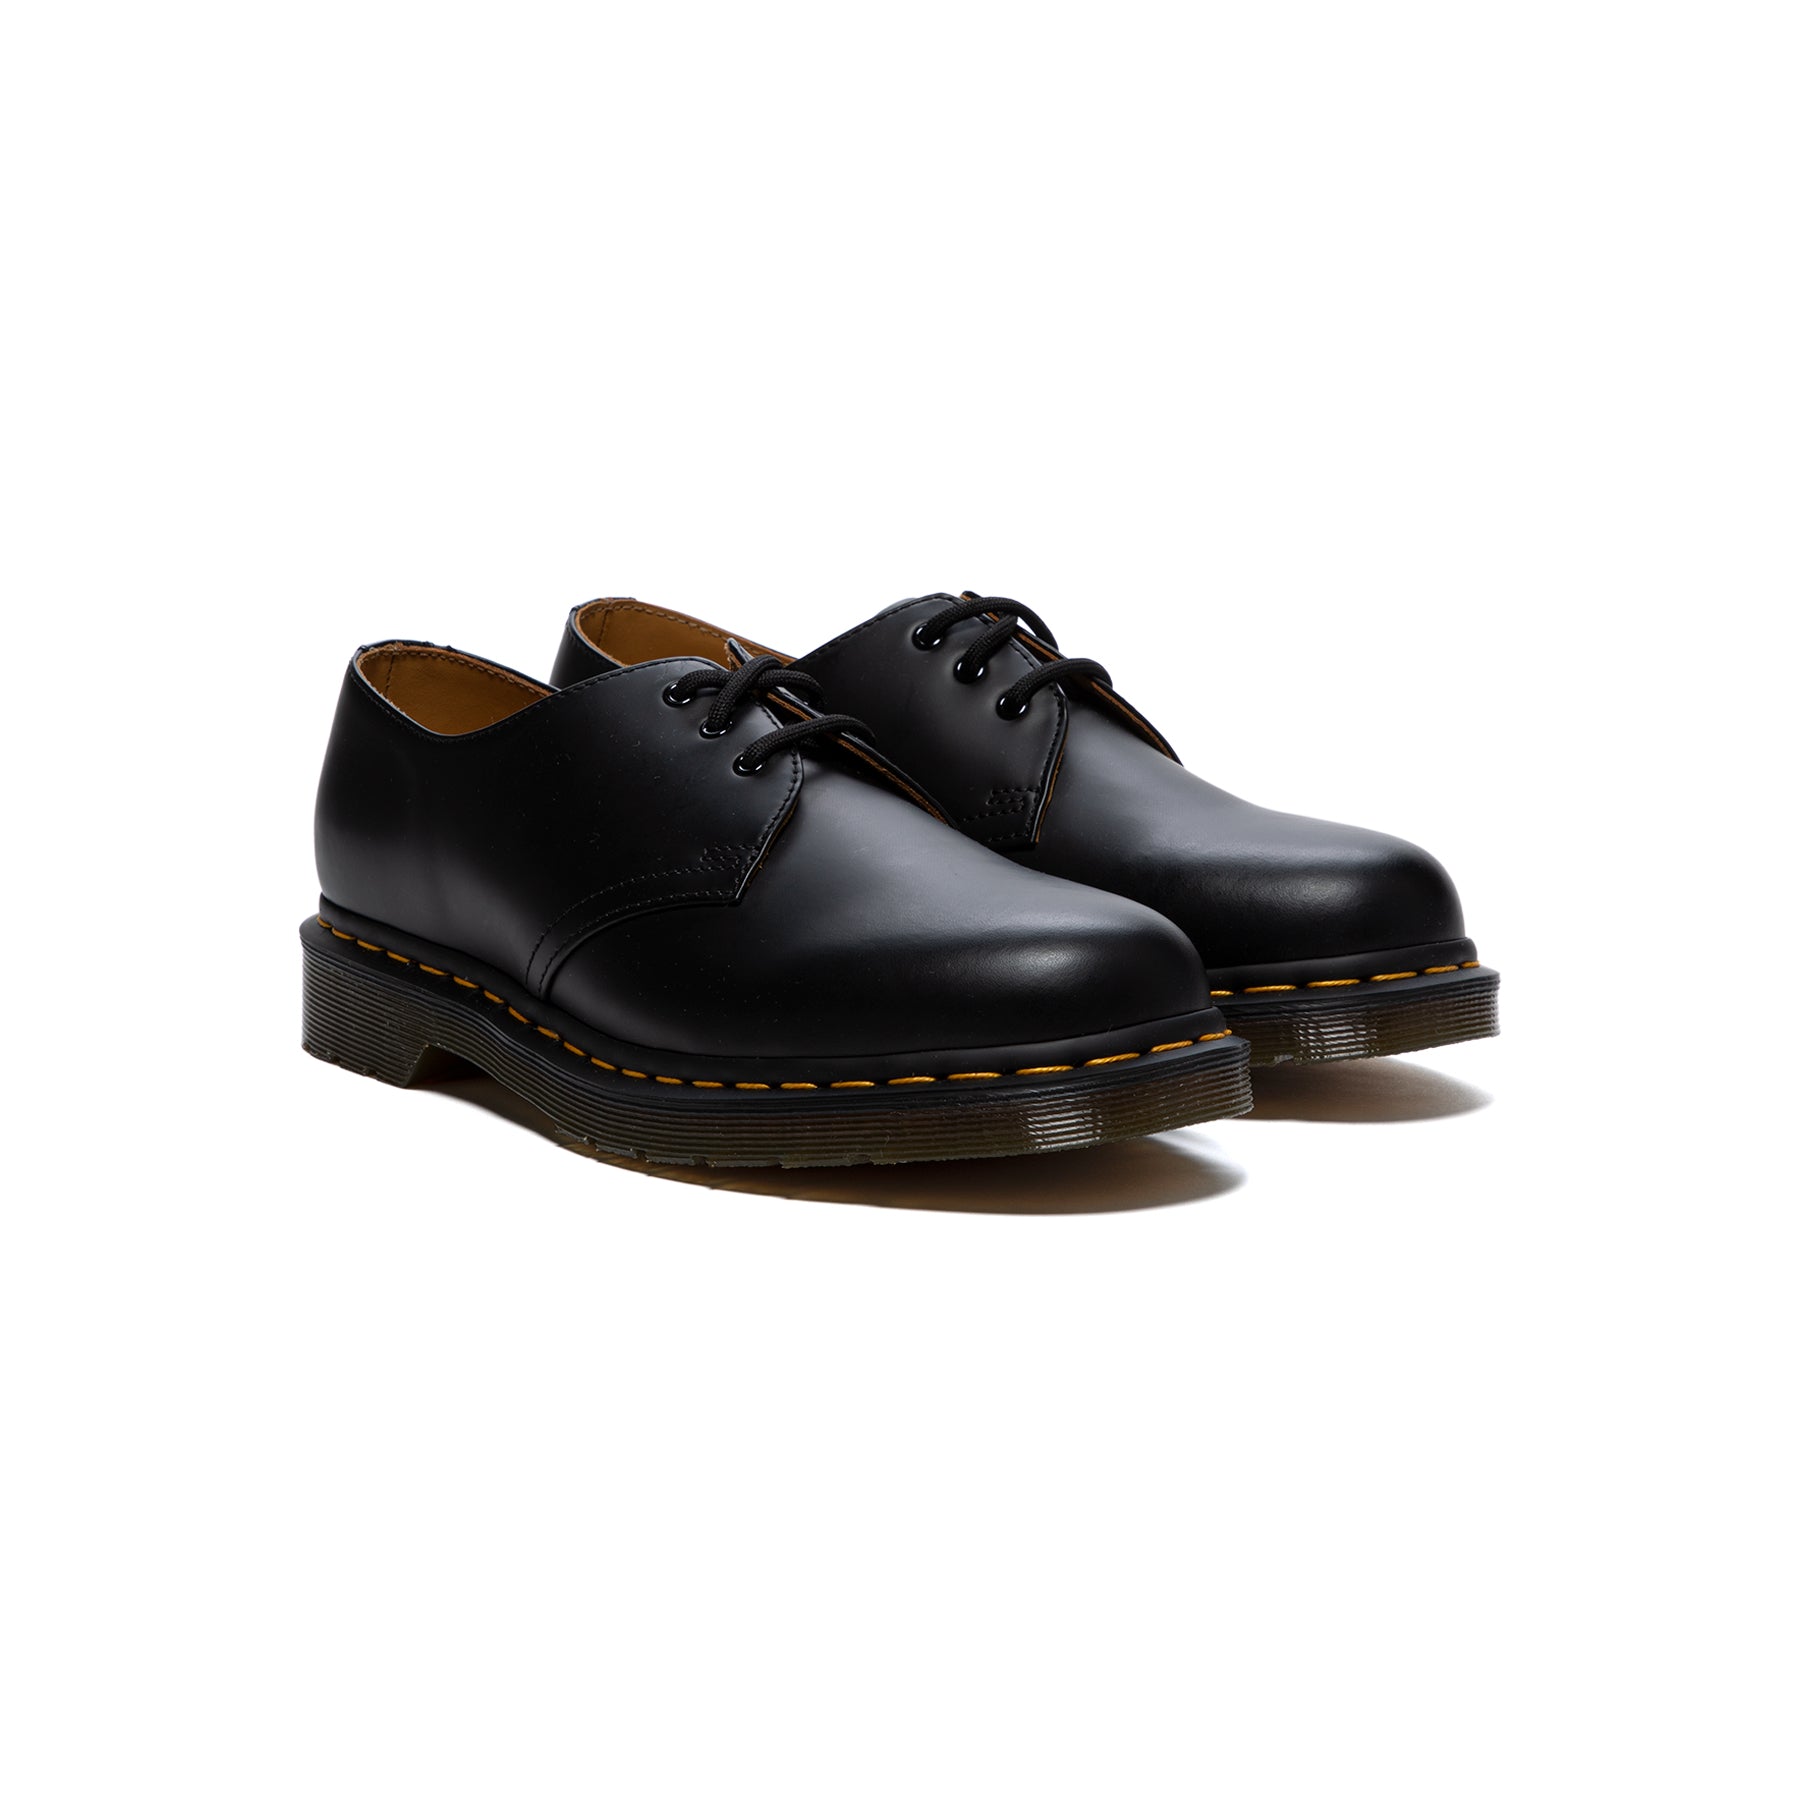 Dr. Martens 1461 Smooth Leather Oxford (Black) – Concepts